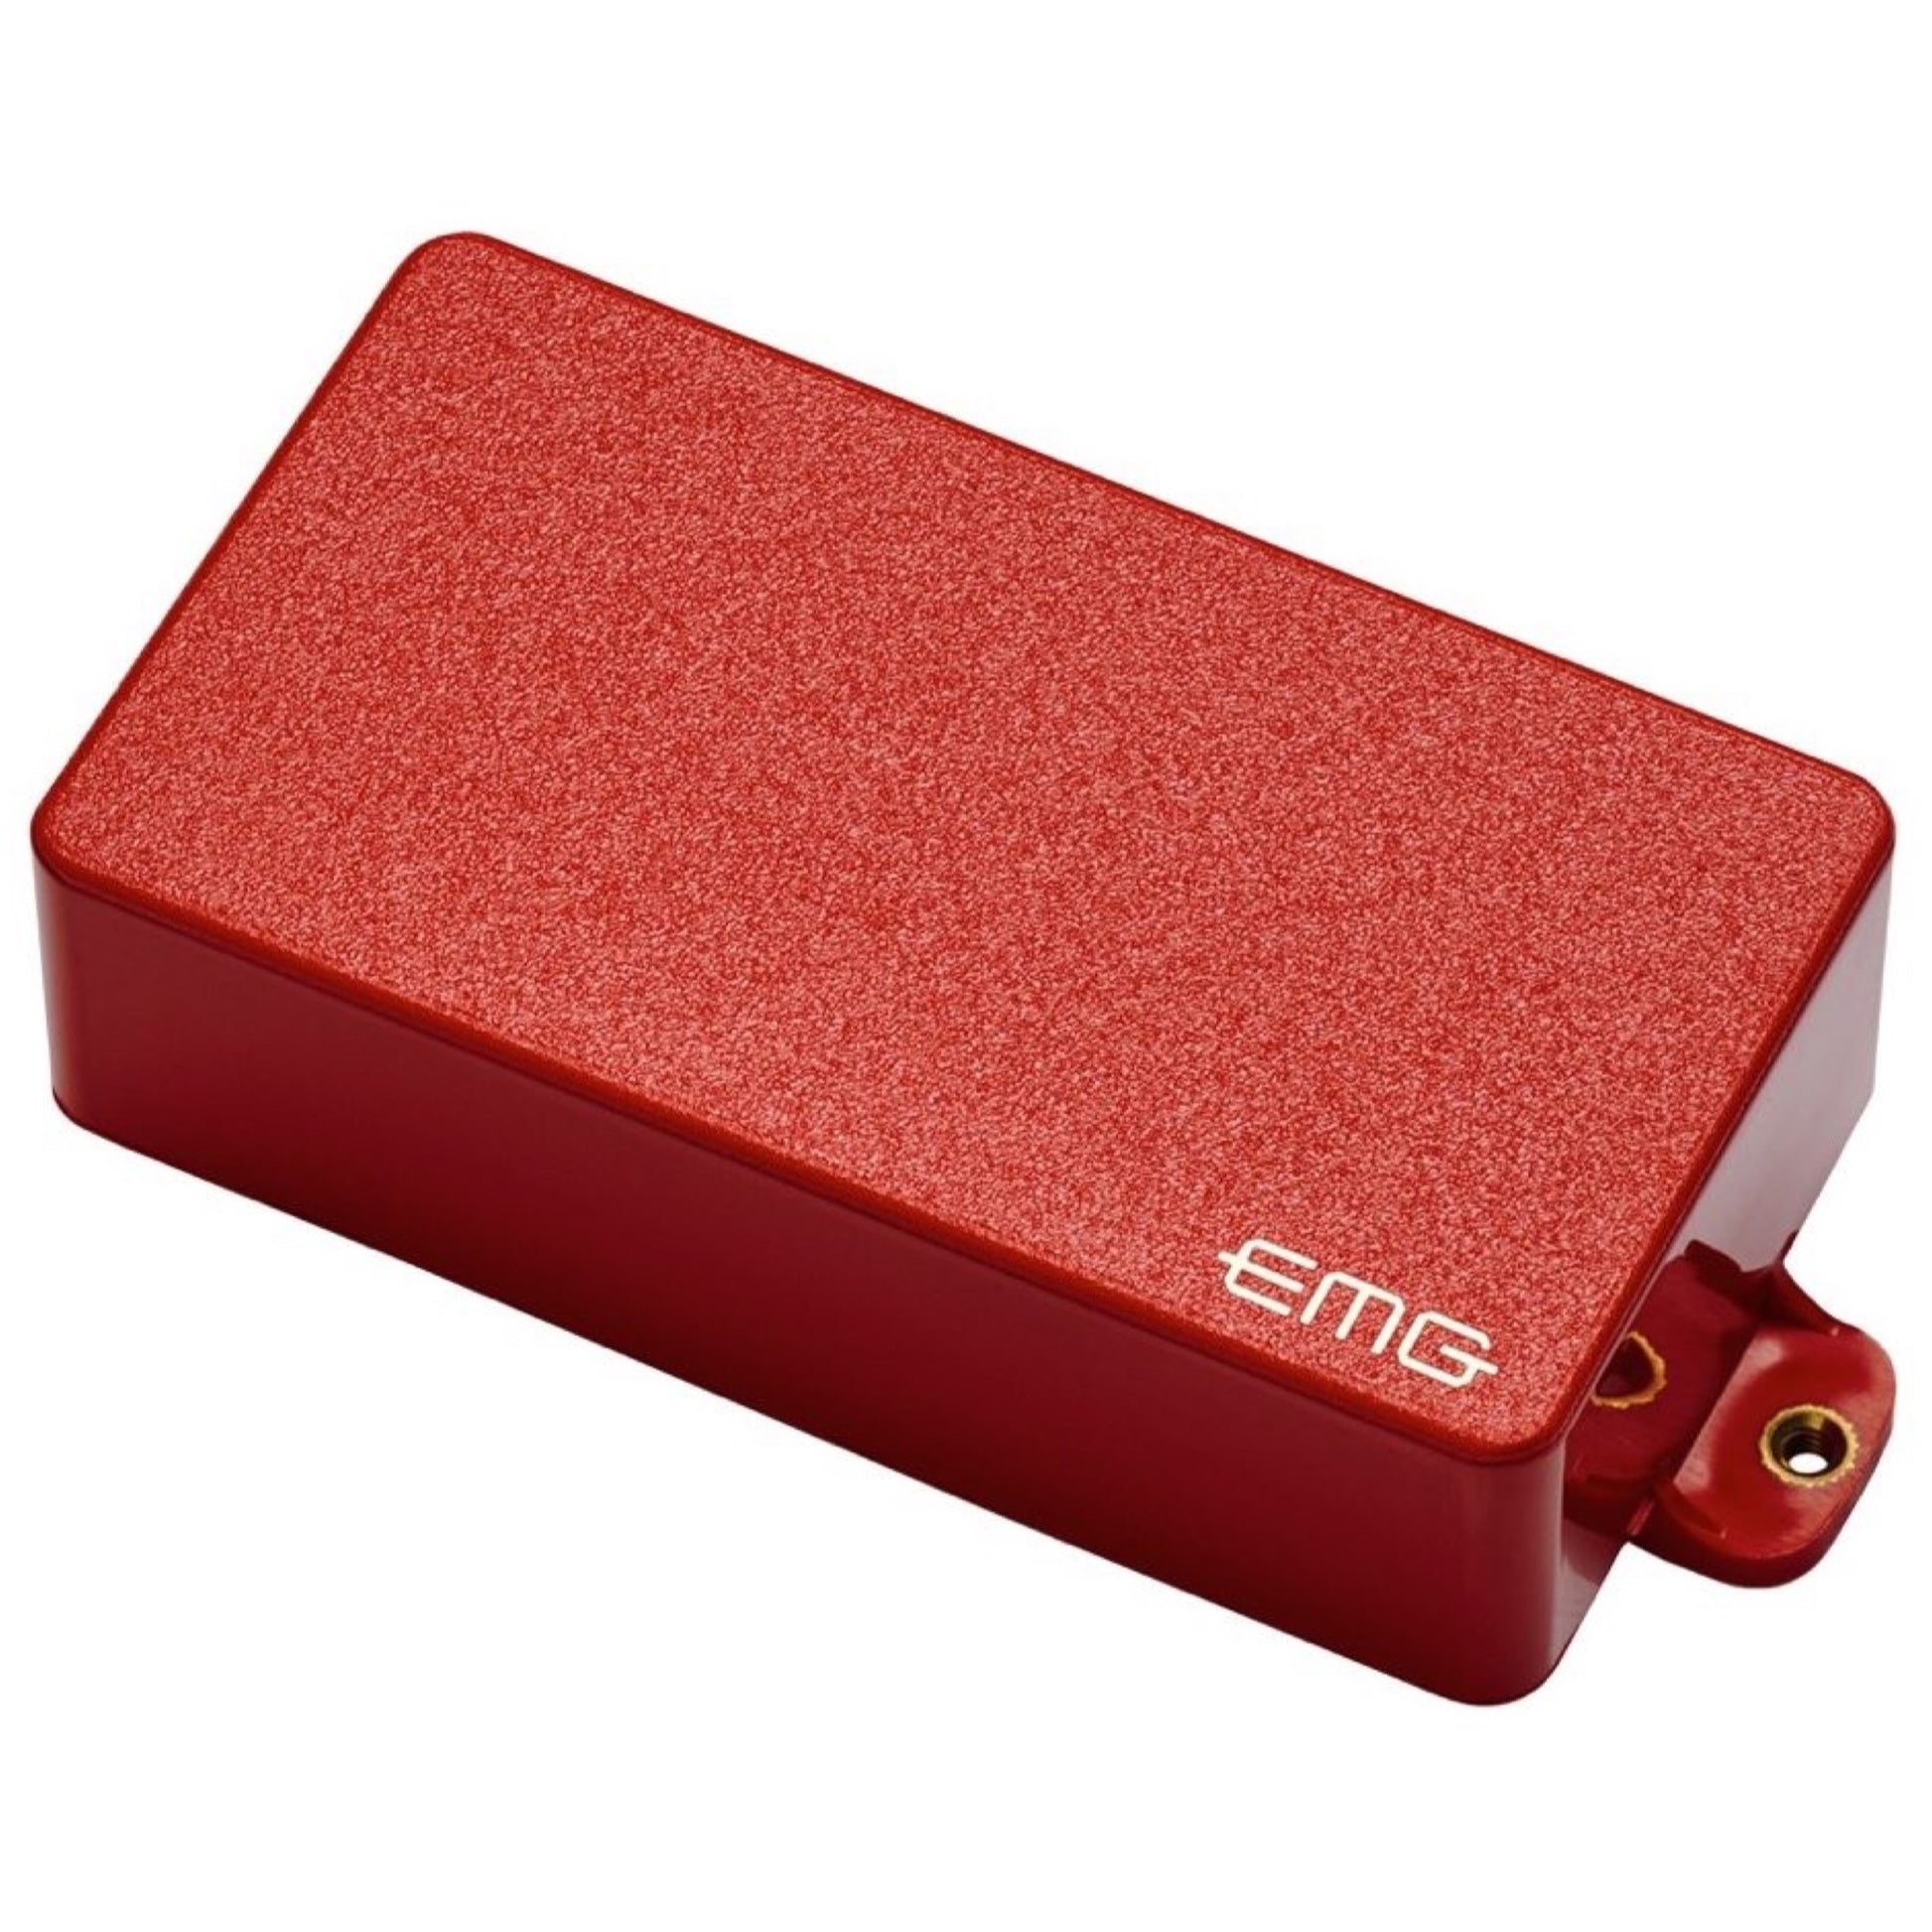 EMG 81 Red Electric Guitar Pickup, Red